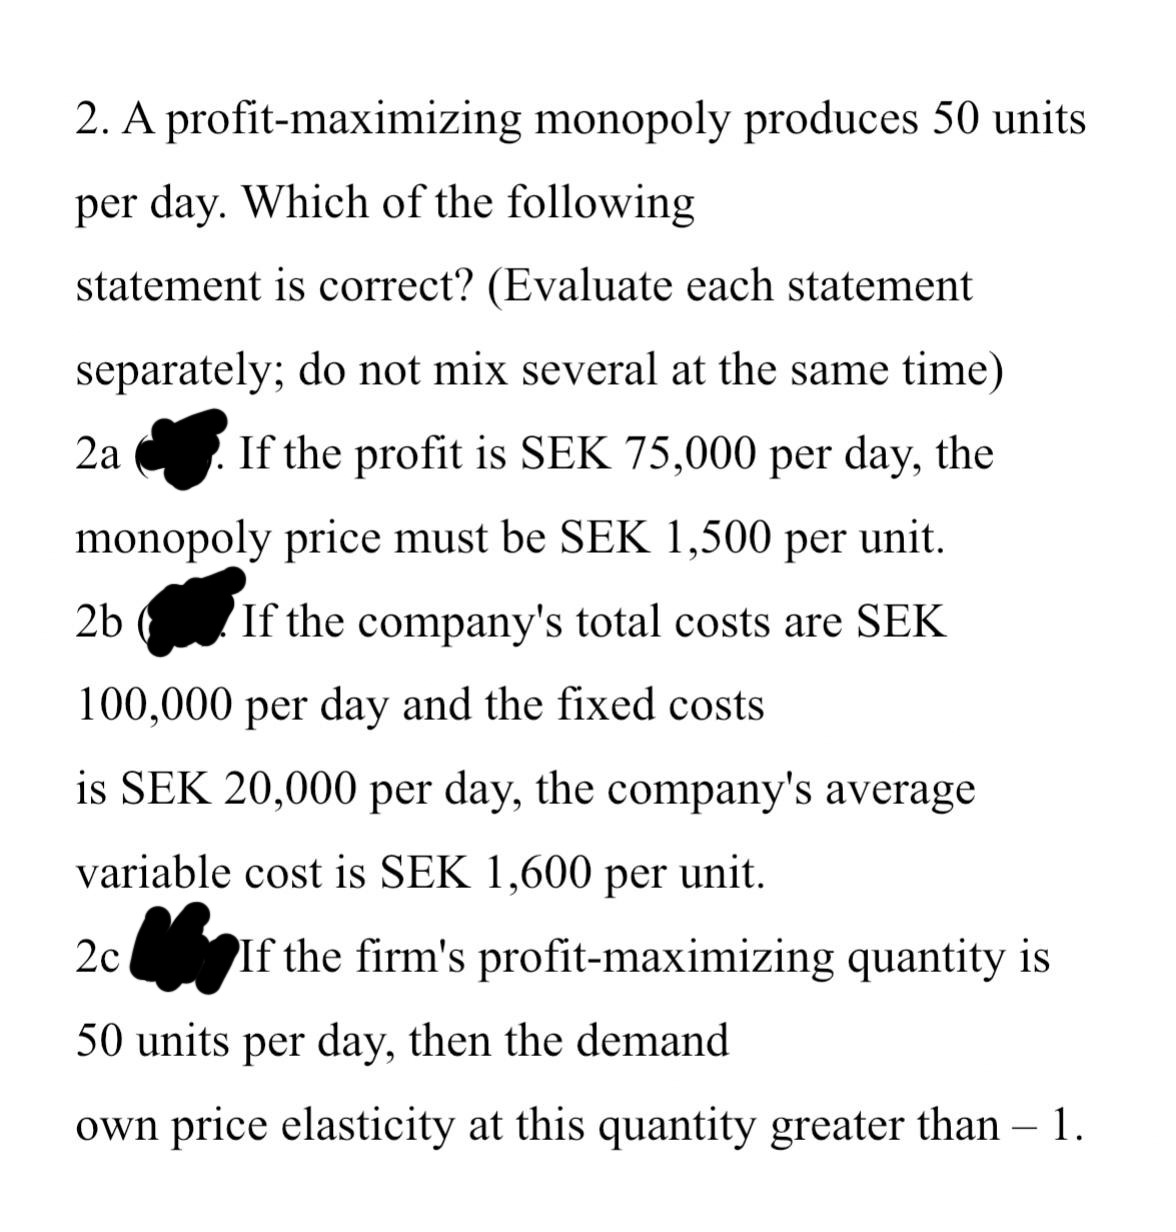 2. A profit-maximizing monopoly produces 50 units
per day. Which of the following
statement is correct? (Evaluate each statement
separately; do not mix several at the same time)
If the profit is SEK 75,000 per day, the
monopoly price must be SEK 1,500 per unit.
If the company's total costs are SEK
100,000 per day and the fixed costs
2b (
is SEK 20,000 per day, the company's average
variable cost is SEK 1,600 per unit.
2c If the firm's profit-maximizing quantity is
50 units per day, then the demand
own price elasticity at this quantity greater than – 1.
2a